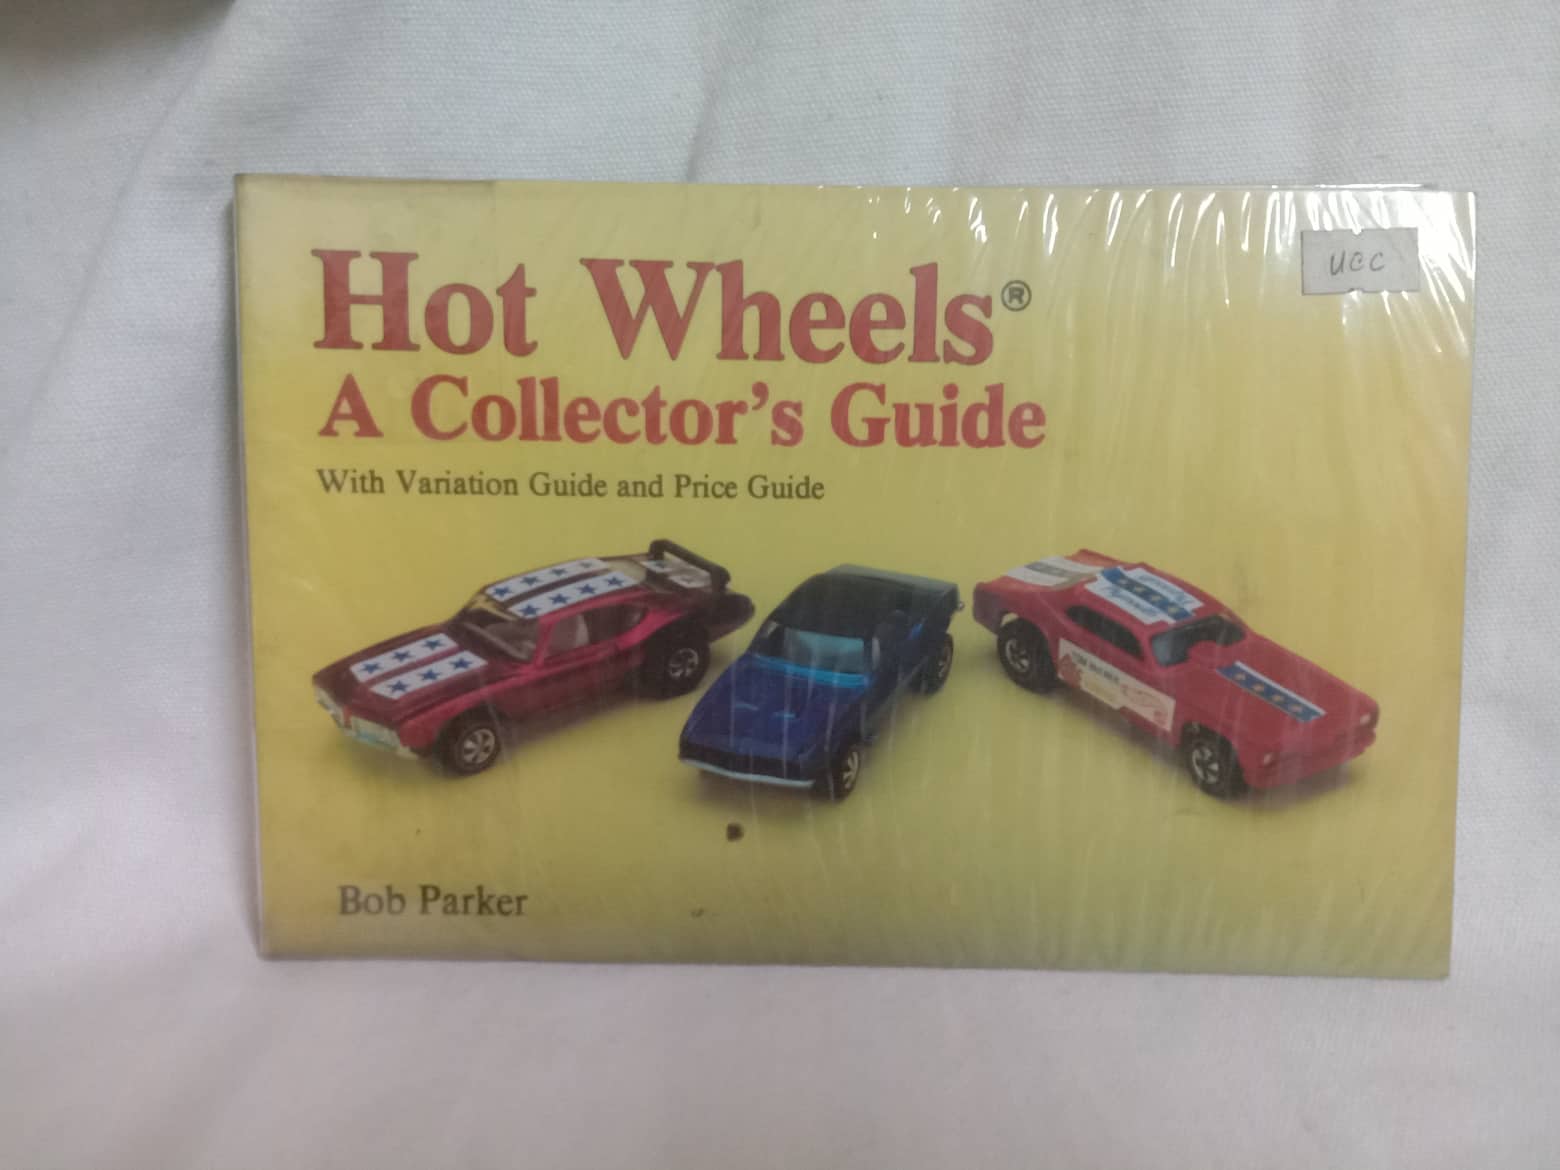 Toy Guide Book